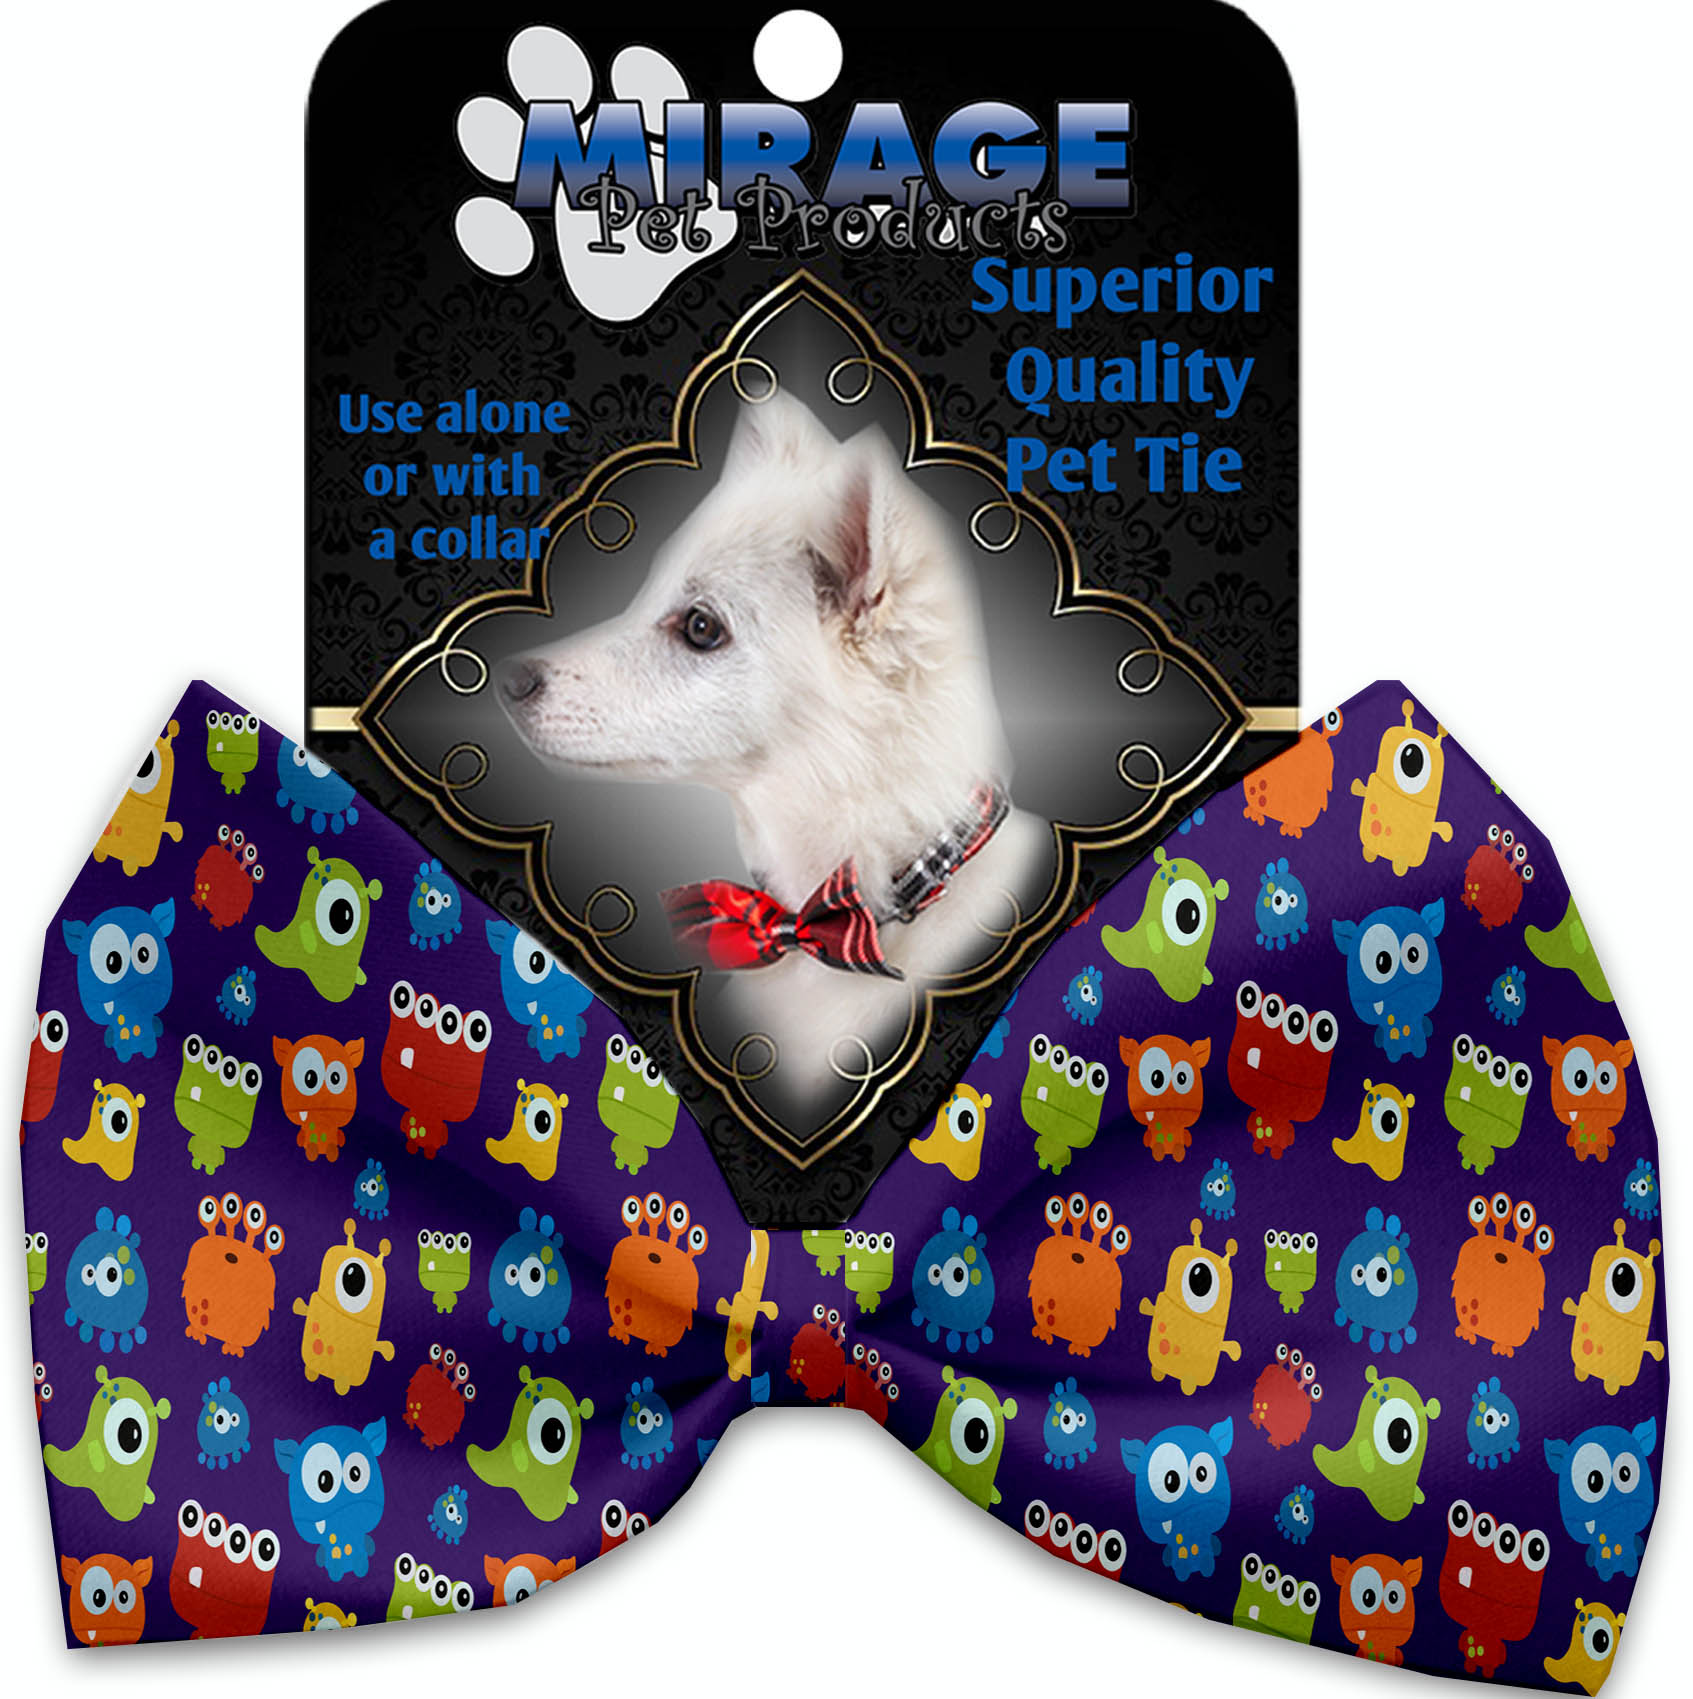 Party Monsters Pet Bow Tie